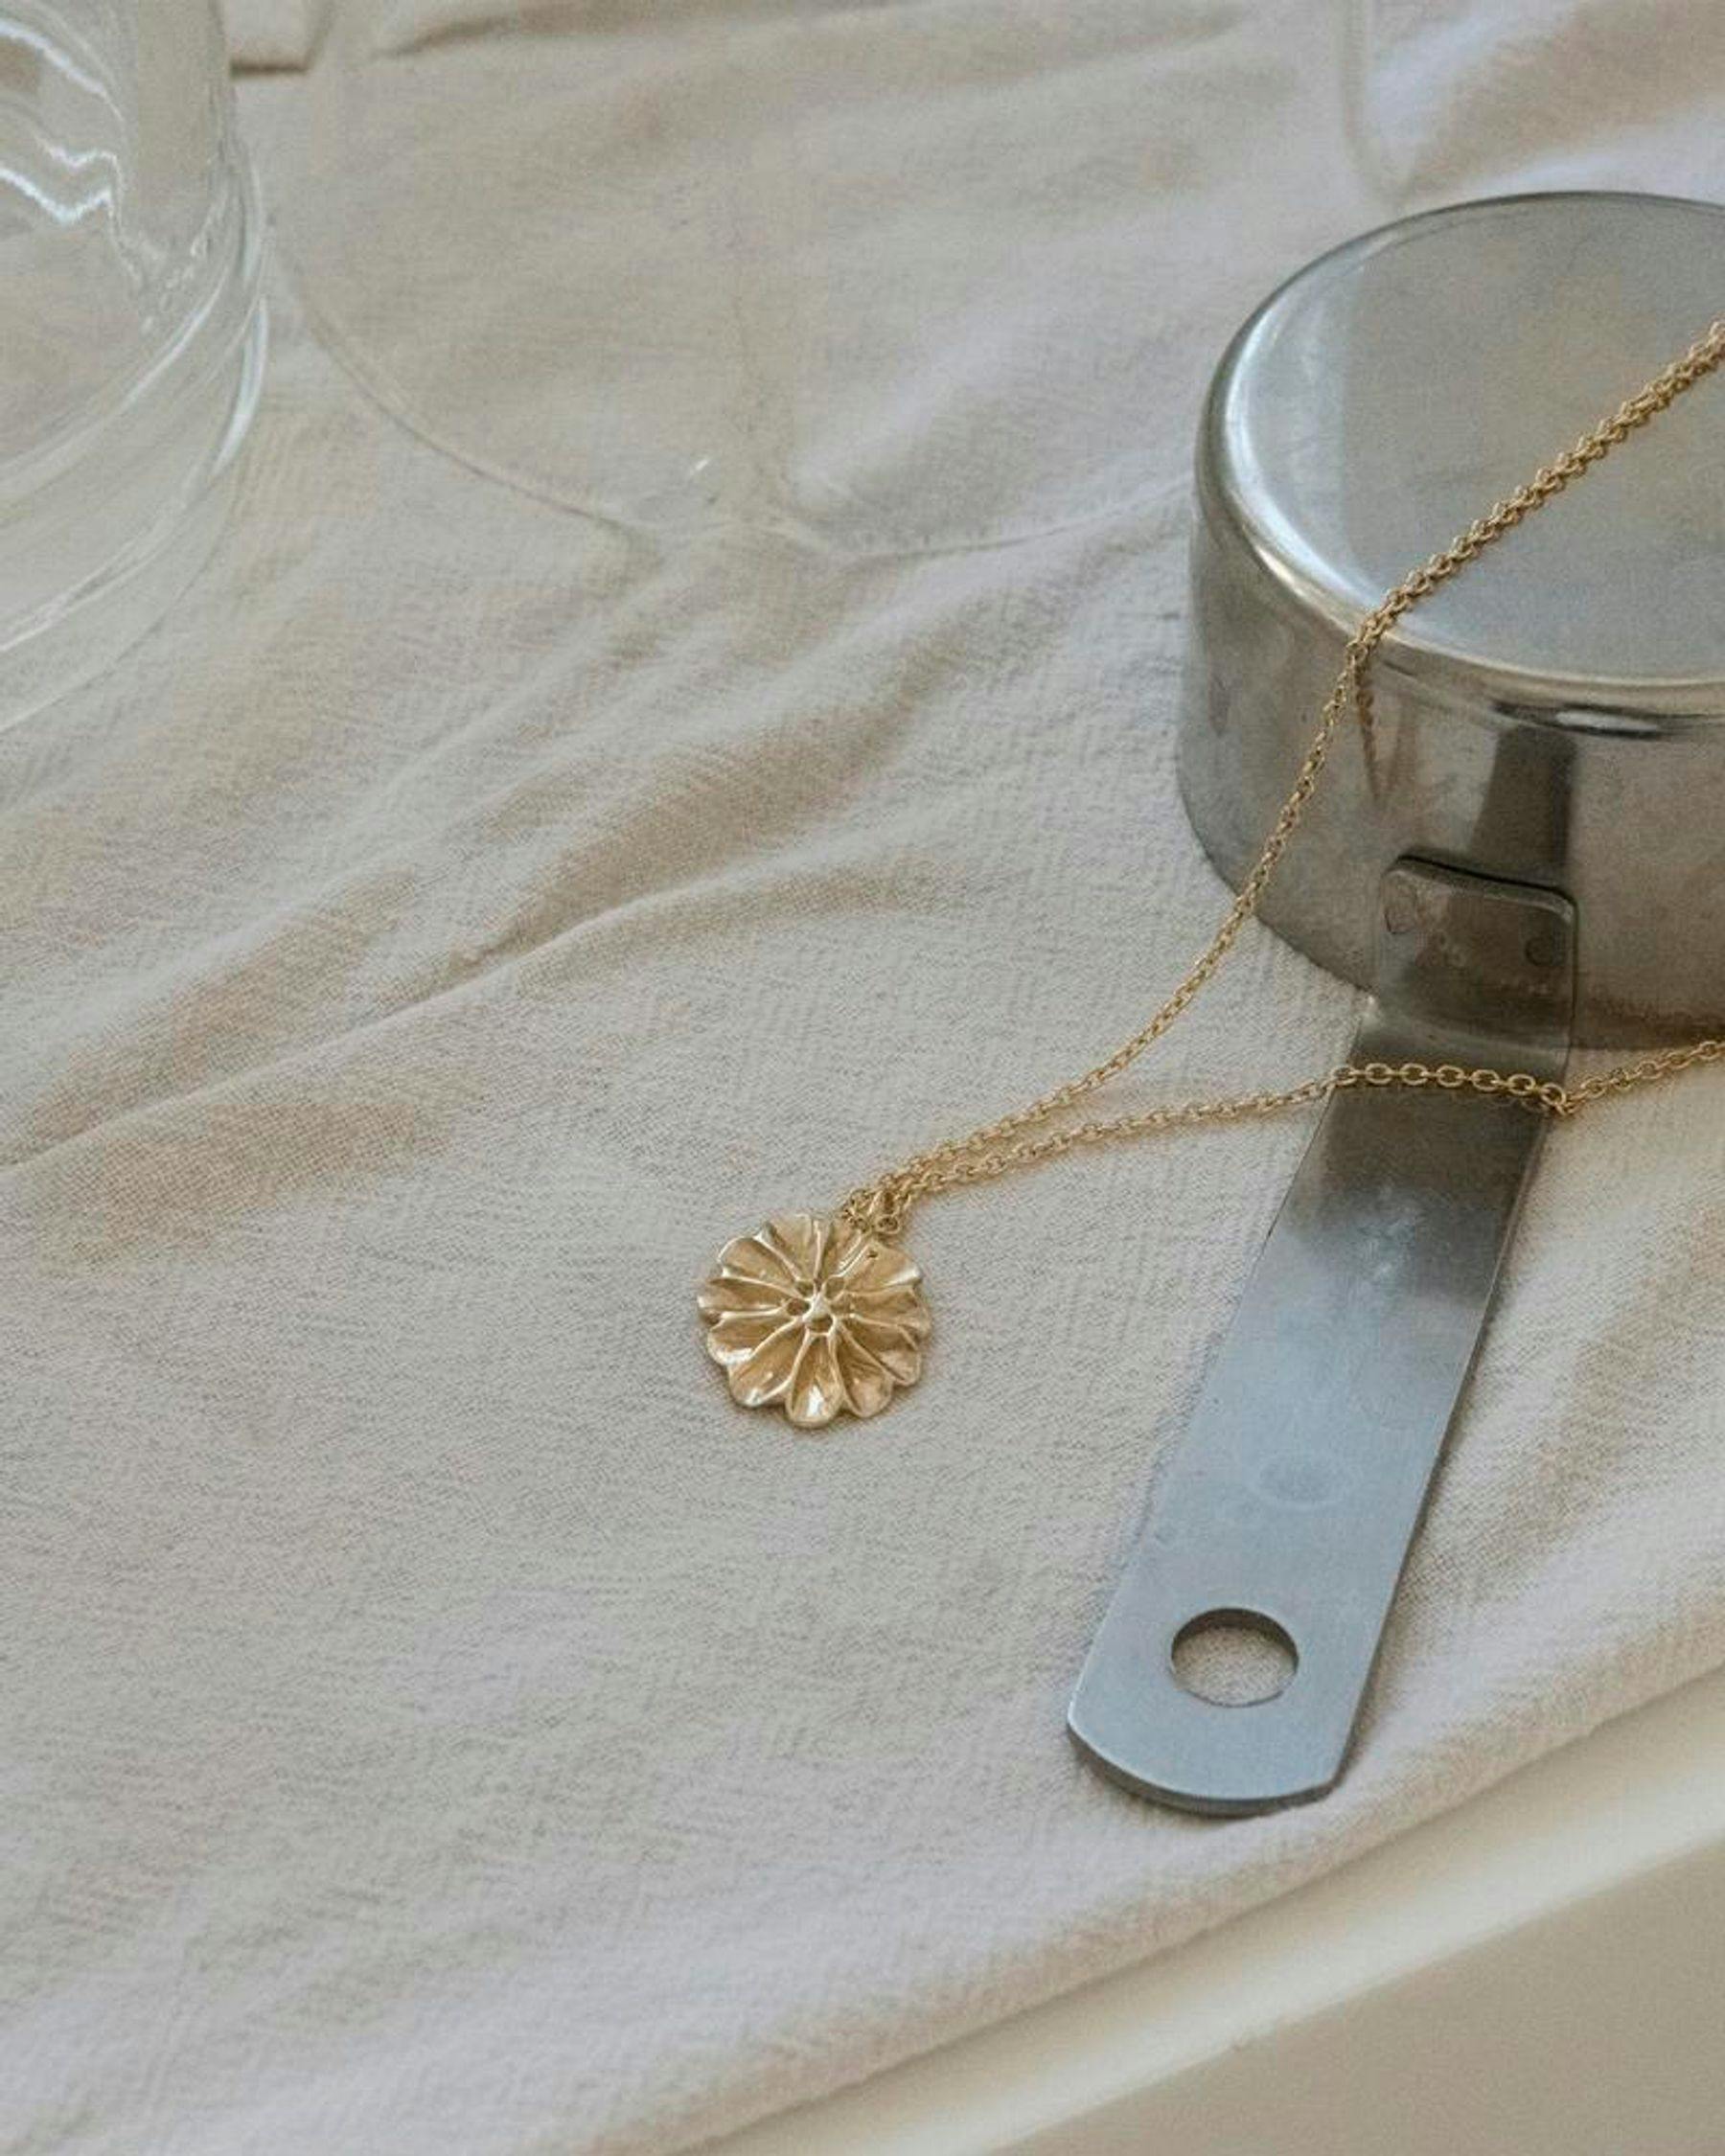 Main image for Flower Necklace Gold